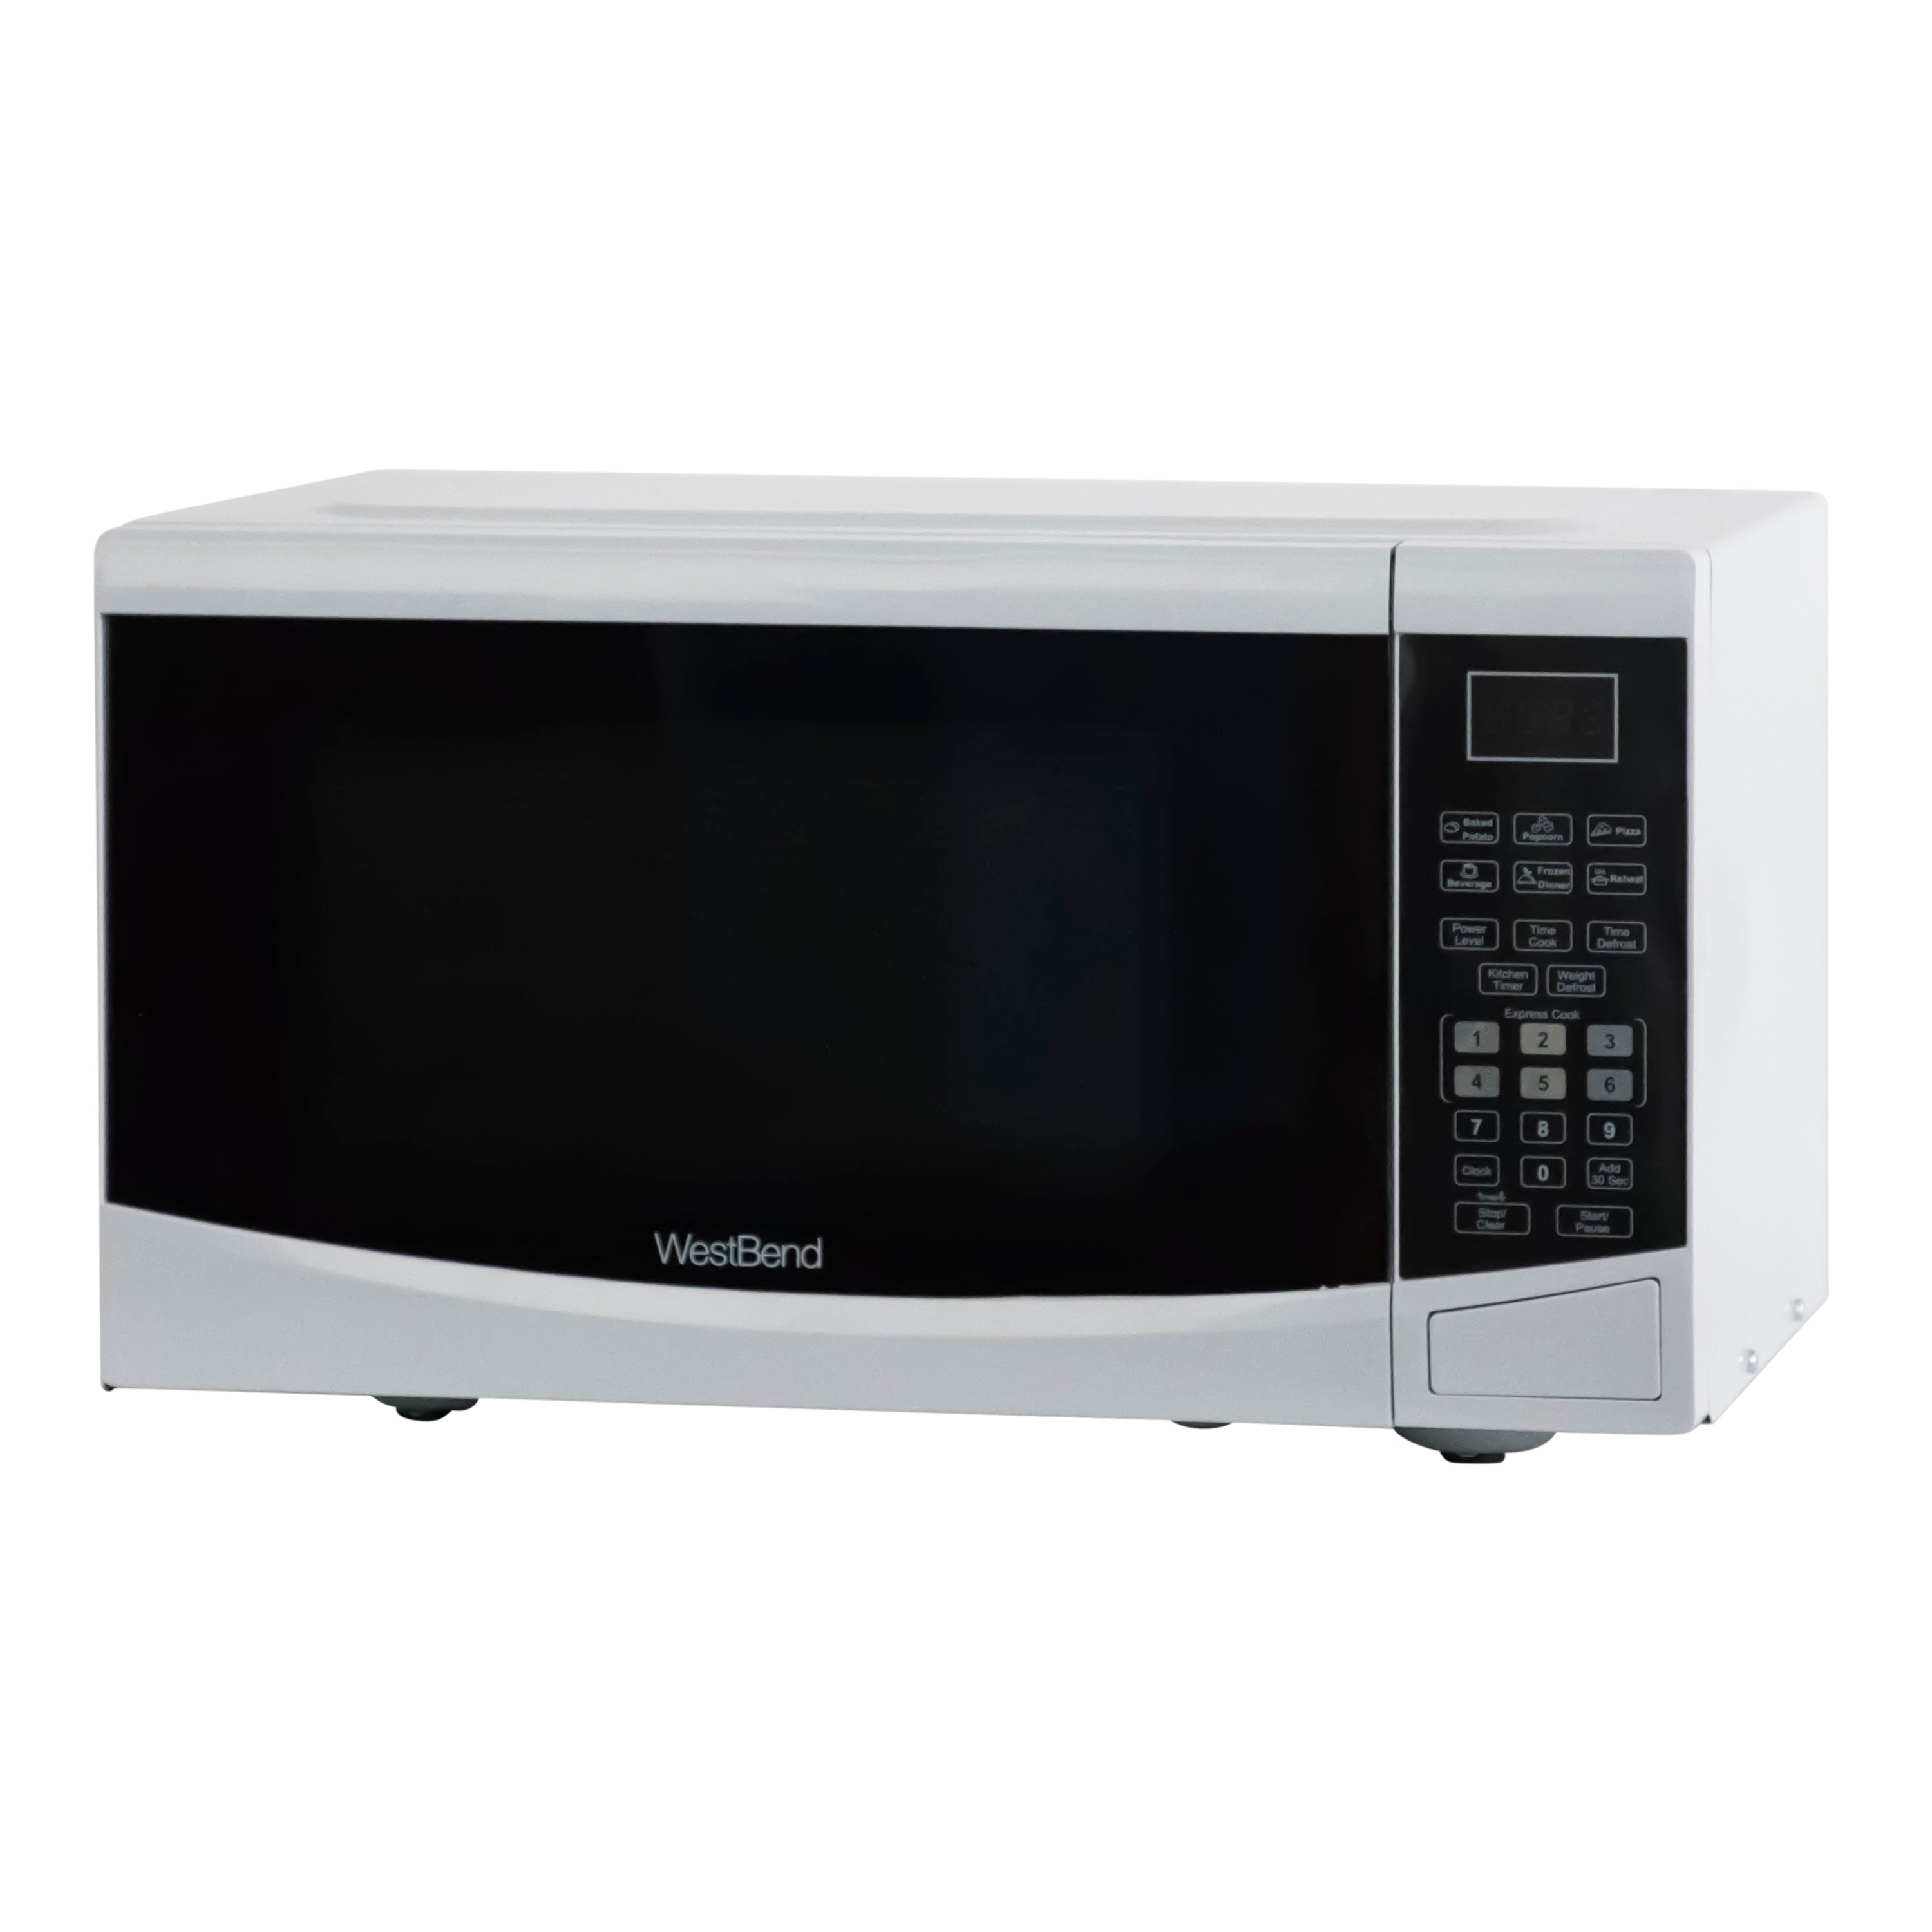 West Bend - WBMW92W, West Bend 0.9 cu. ft. Microwave Oven, in White